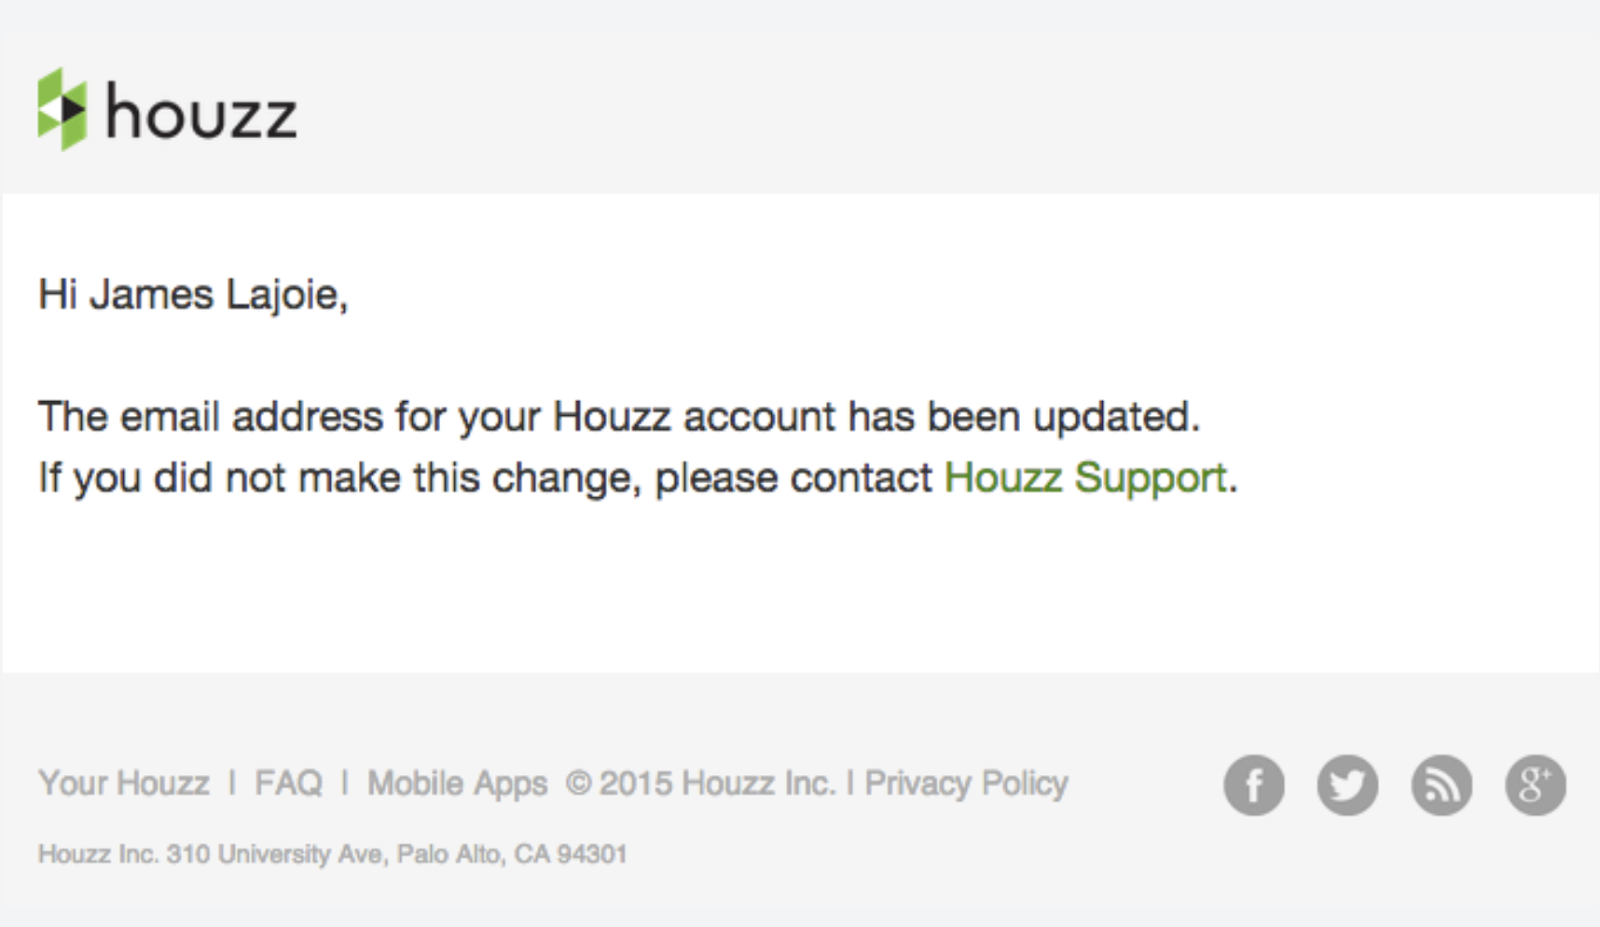 Example of a Houzz account update notification